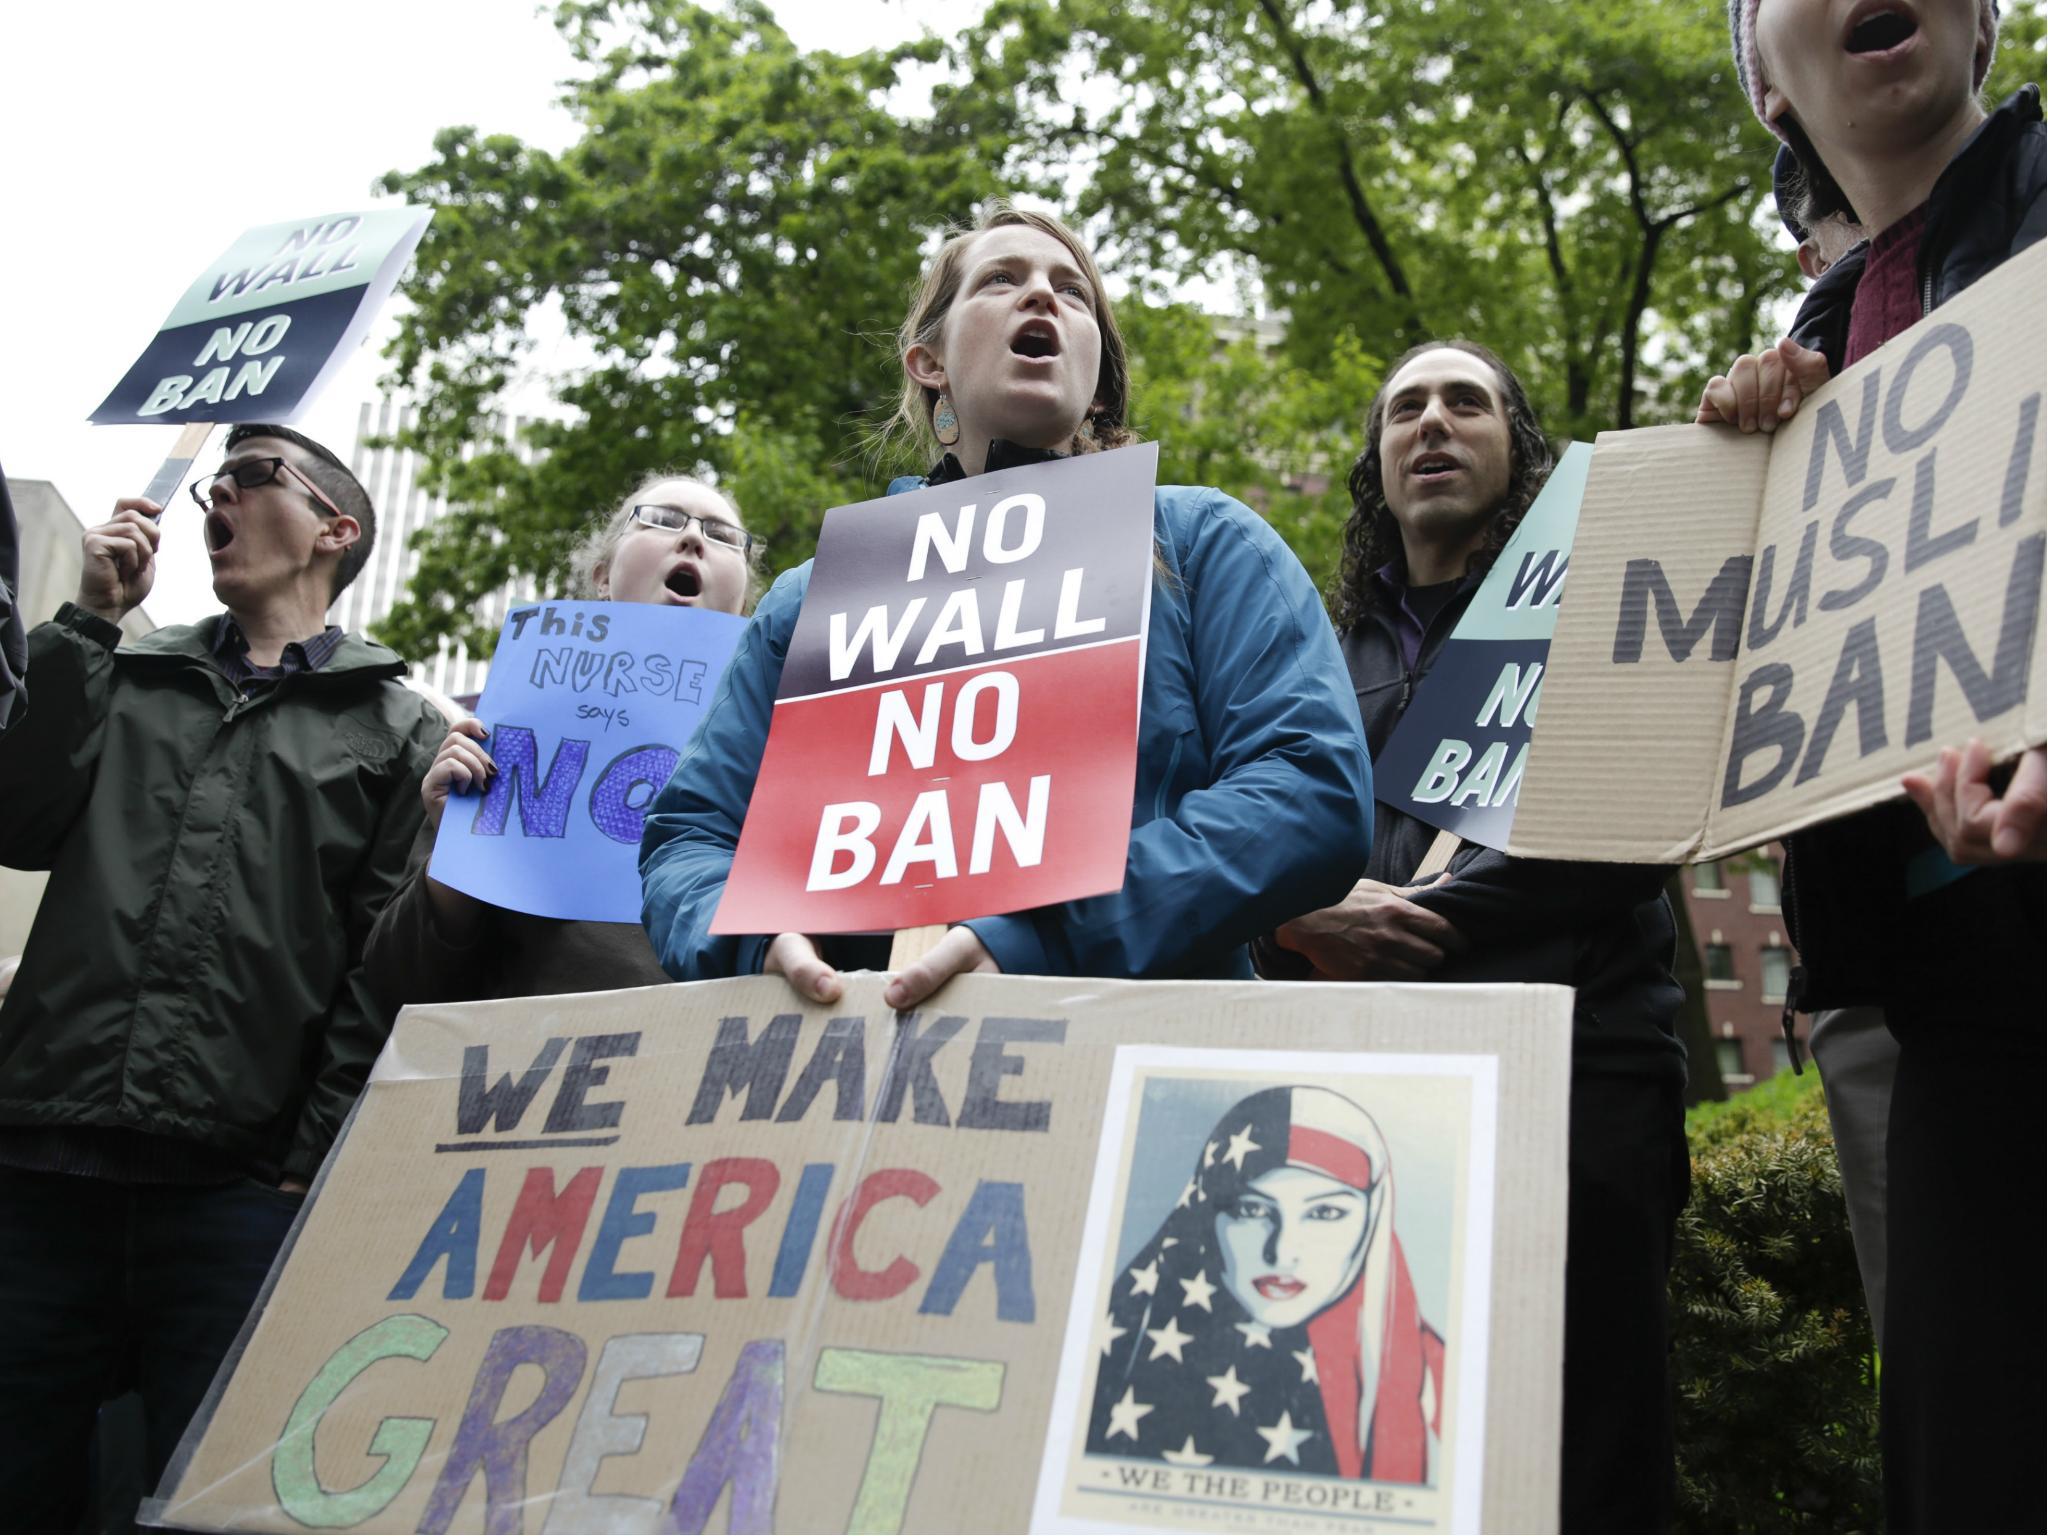 People protest outside as the 9th US Circuit Court of Appeals prepares to hear arguments on US President Donald Trump's revised travel ban in Seattle, Washington on 15 May 2017.